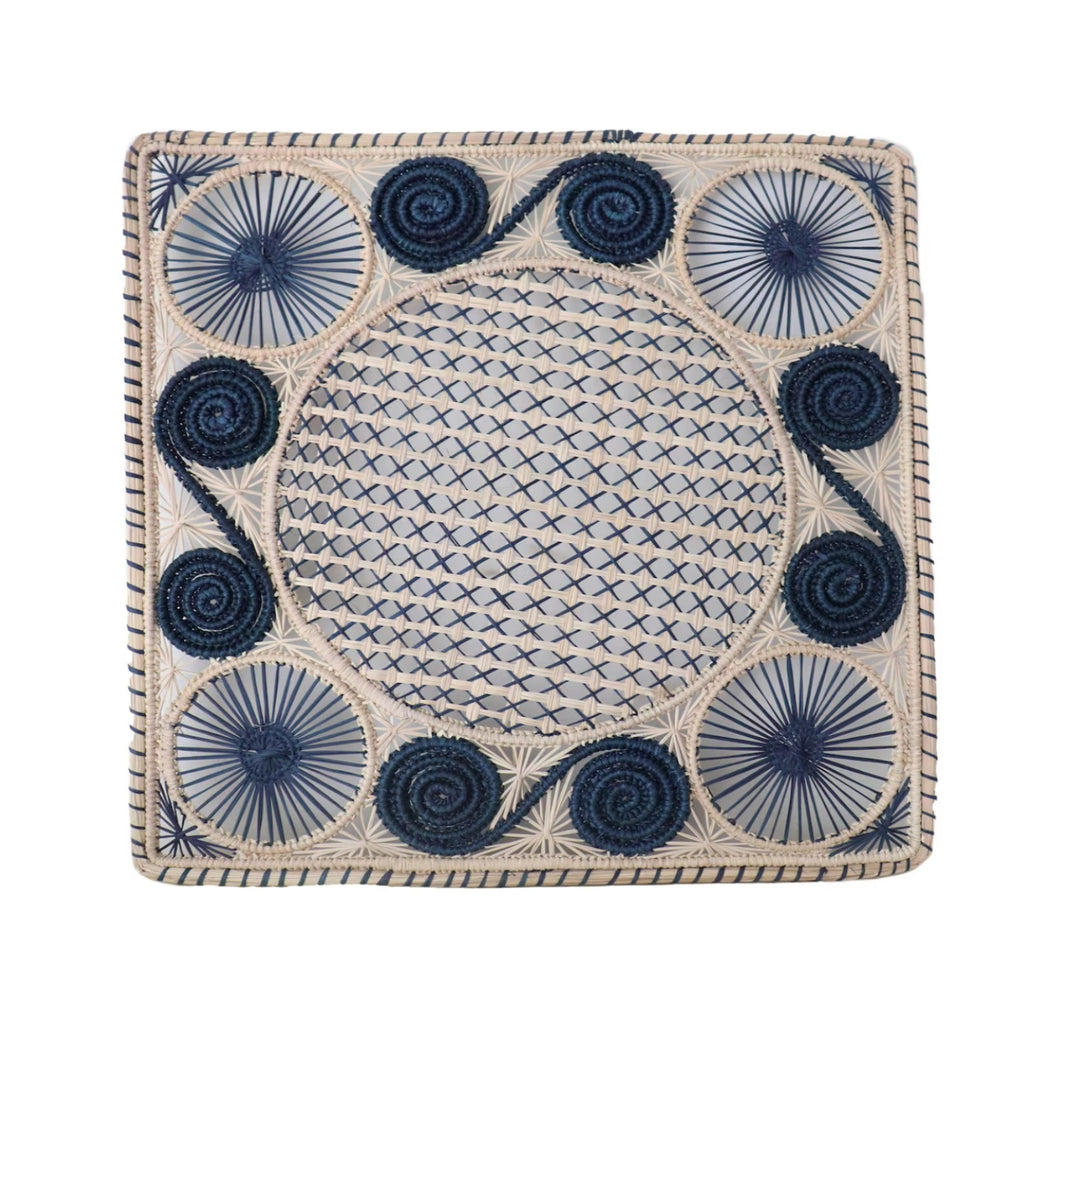 Caracoli Square Handwoven Iraca Placemat with Color Trim